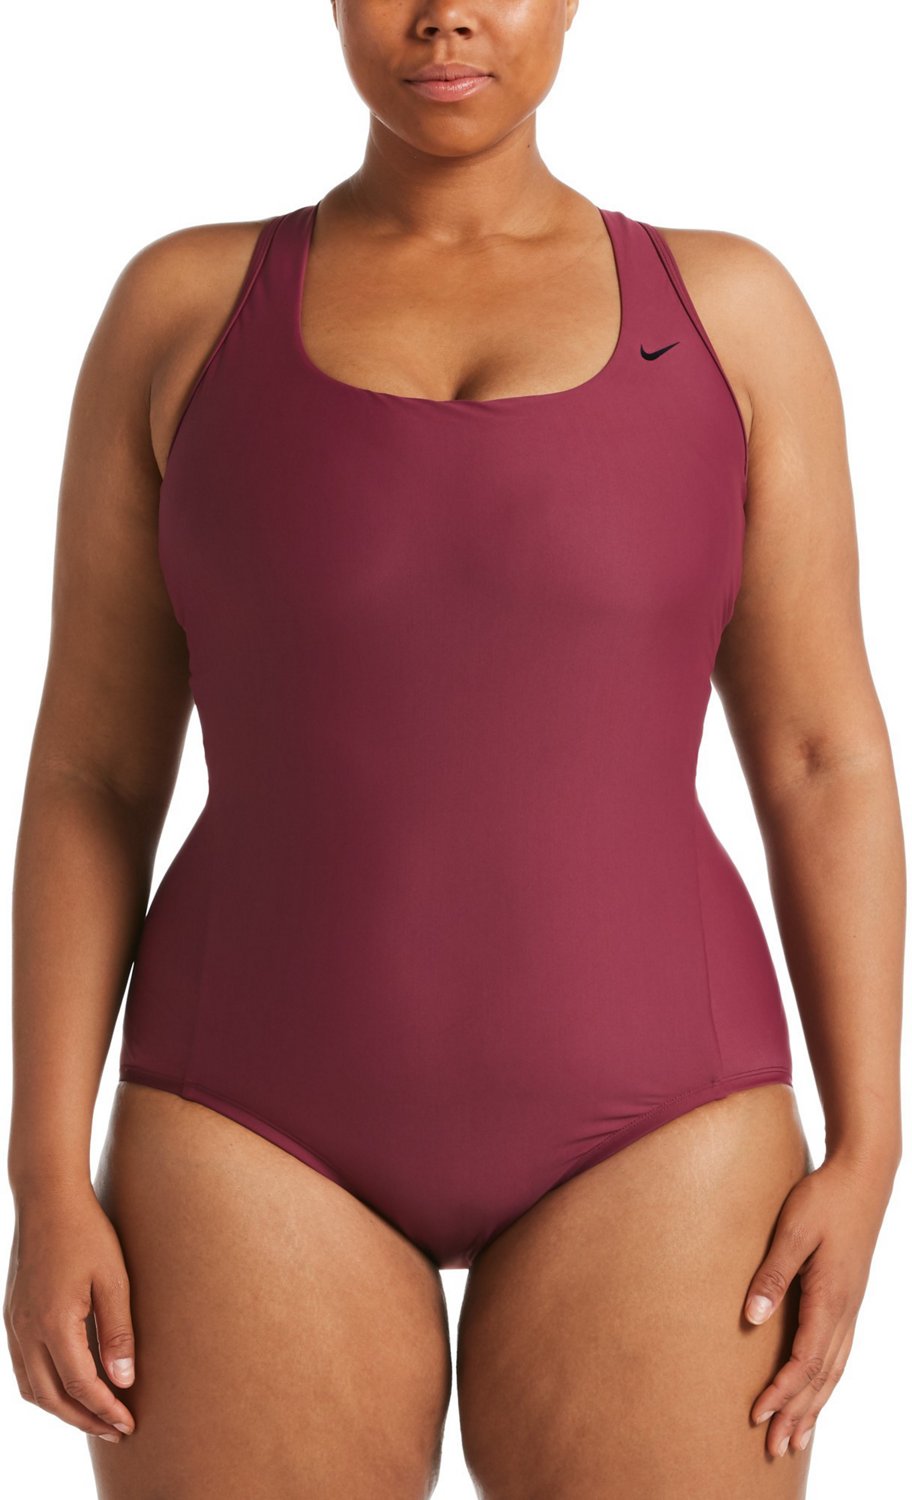 Swimsuit Separates at Academy Sports 